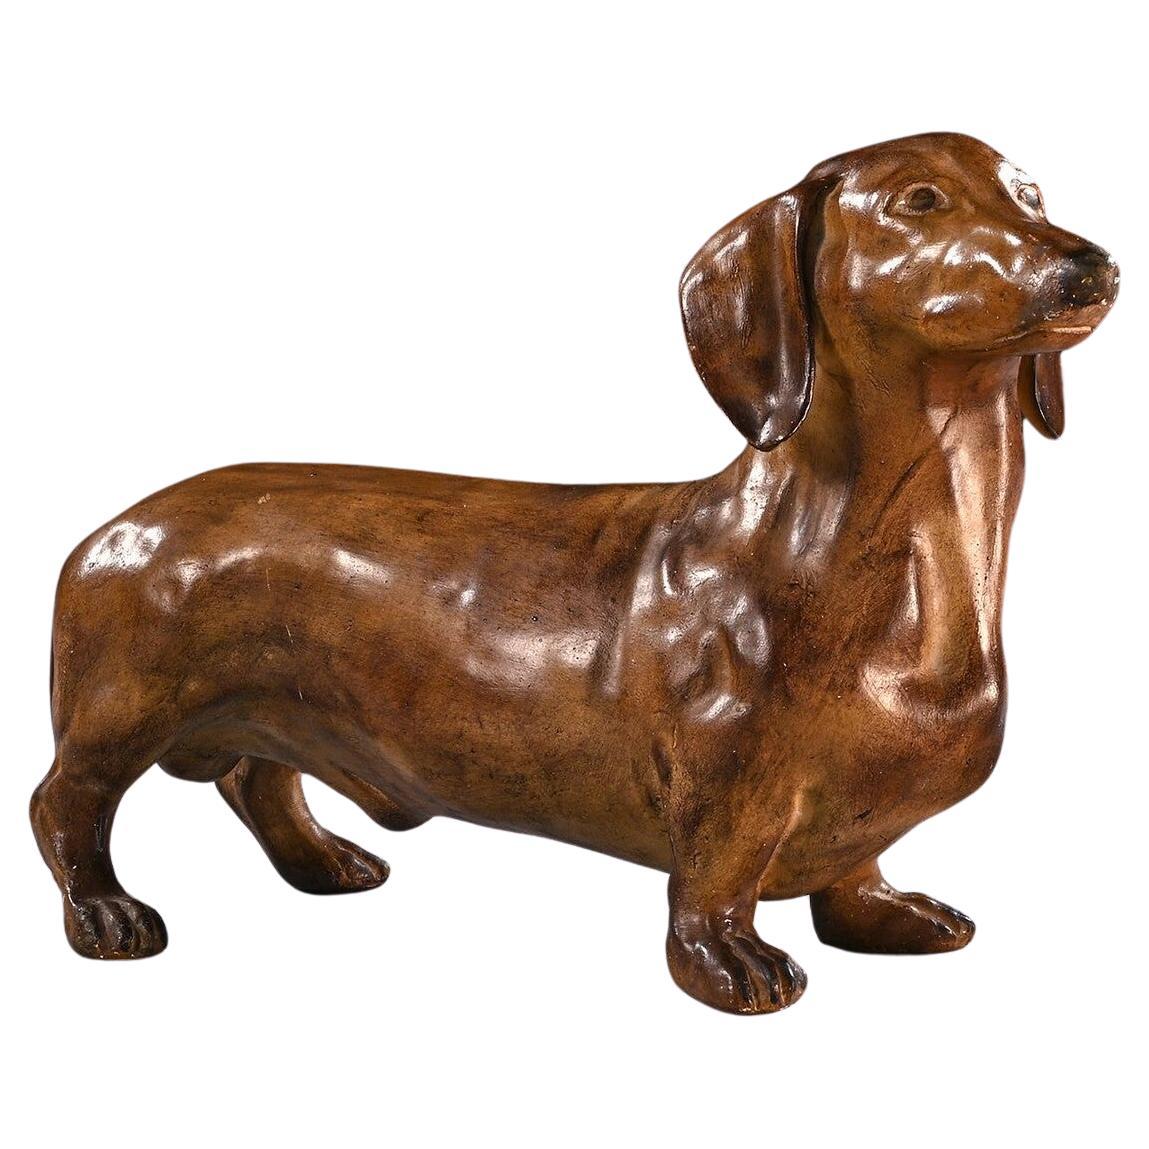 Rare French Life-like Glazed Terracotta Sculpture of a Dachshund Dog For Sale